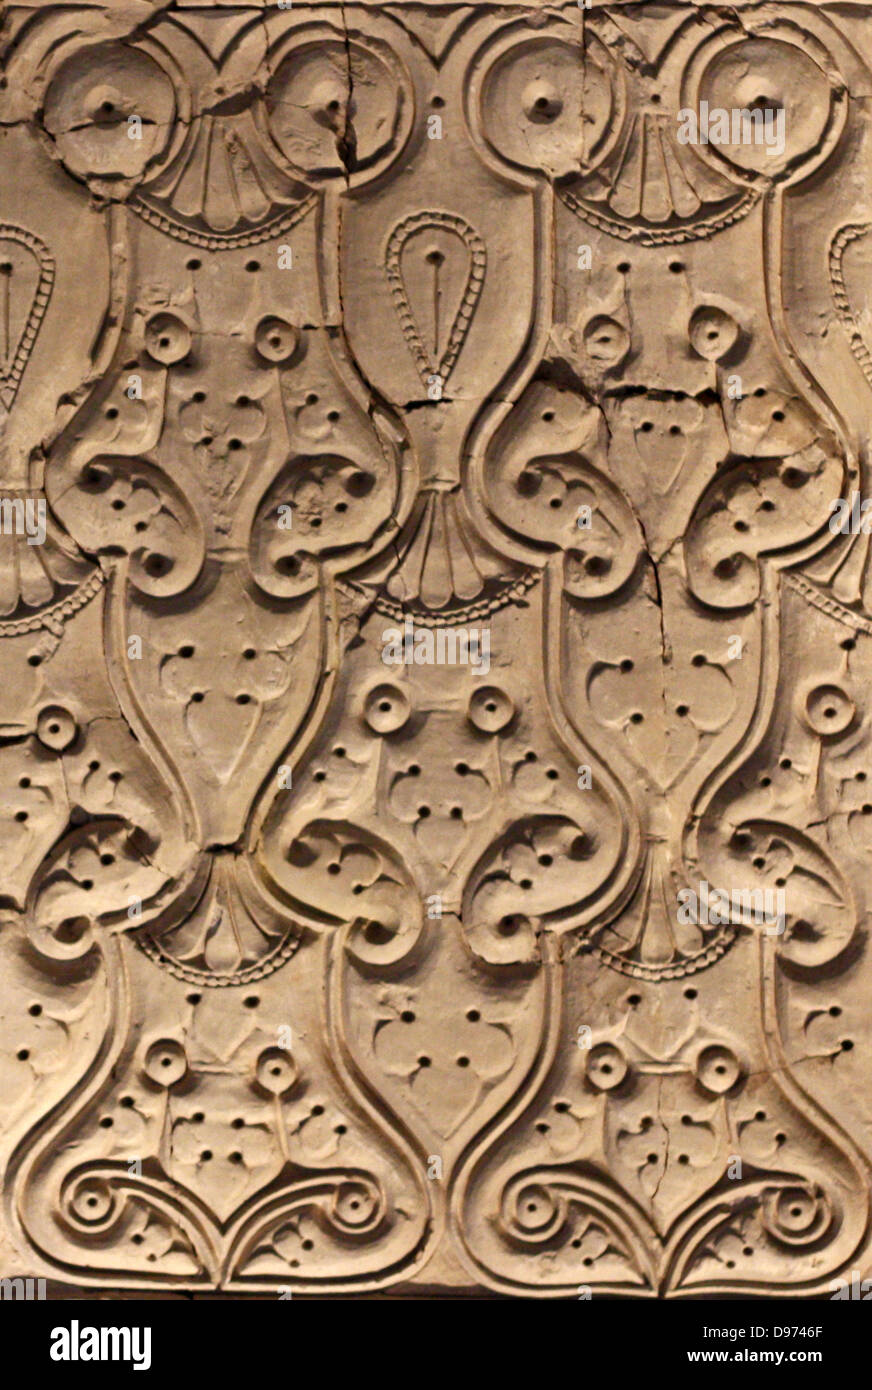 Wall paper made from stucco : interiors from houses and palaces. Particularly famous for Samarra is its carved stucco, with once decorated the dadoes of houses and palaces. There are three different styles. Two styles show vine leaves, grapes and leaf tendrils closely follow the tradition of Late Antiquity. There is then the flat cut 'bevelled' or 'slant' style of carving with stylised ornaments repeated in endless series. This was a ground-breaking invention and widely used in the Abbasid Empire in the 9th and 10th century. Stock Photo